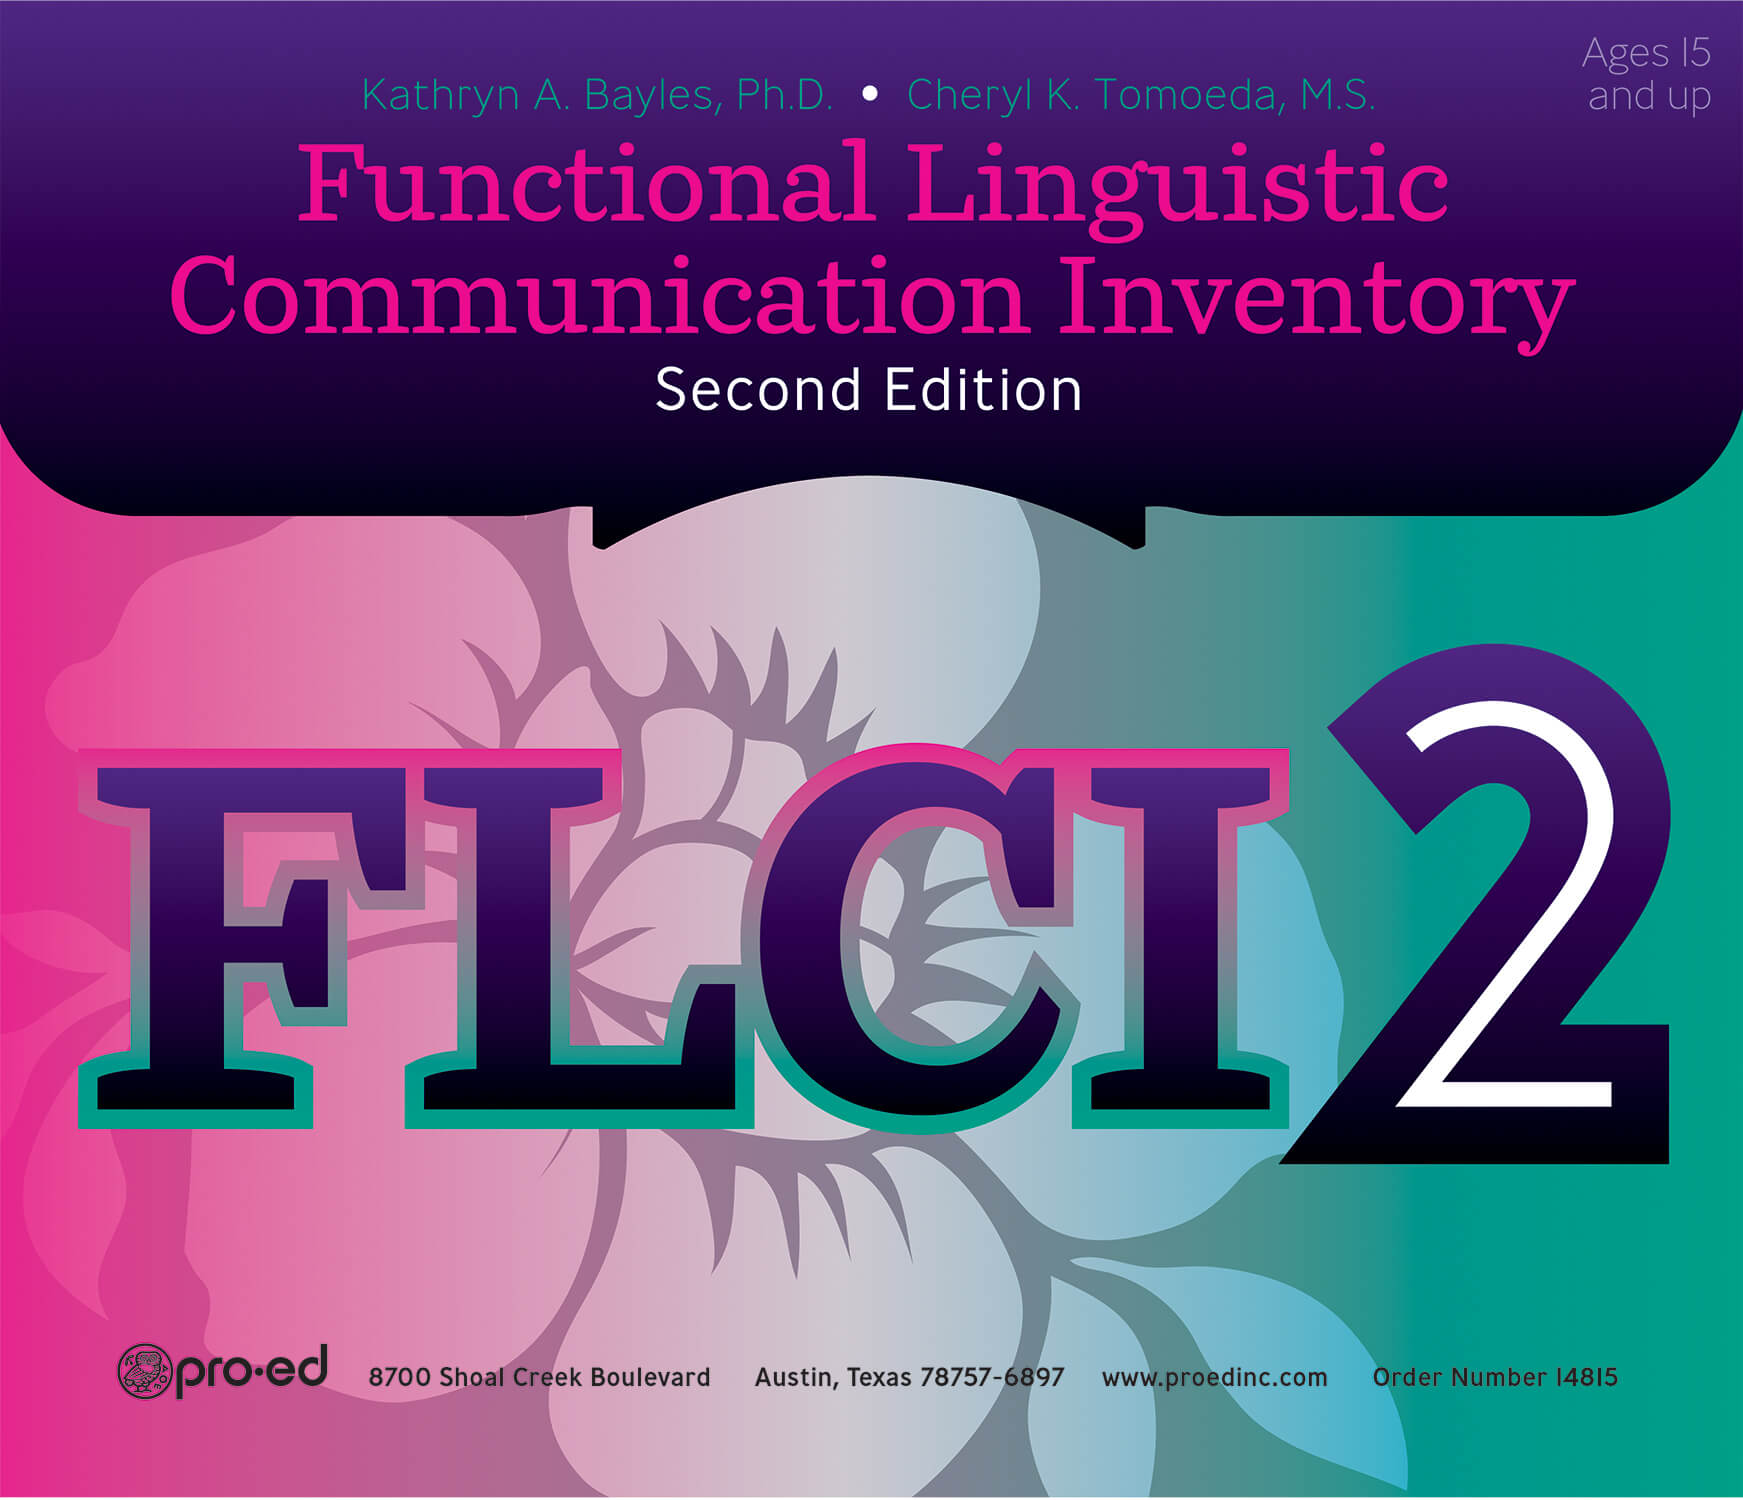 FLCI-2: Functional Linguistic Communication Inventory 2nd Ed - 